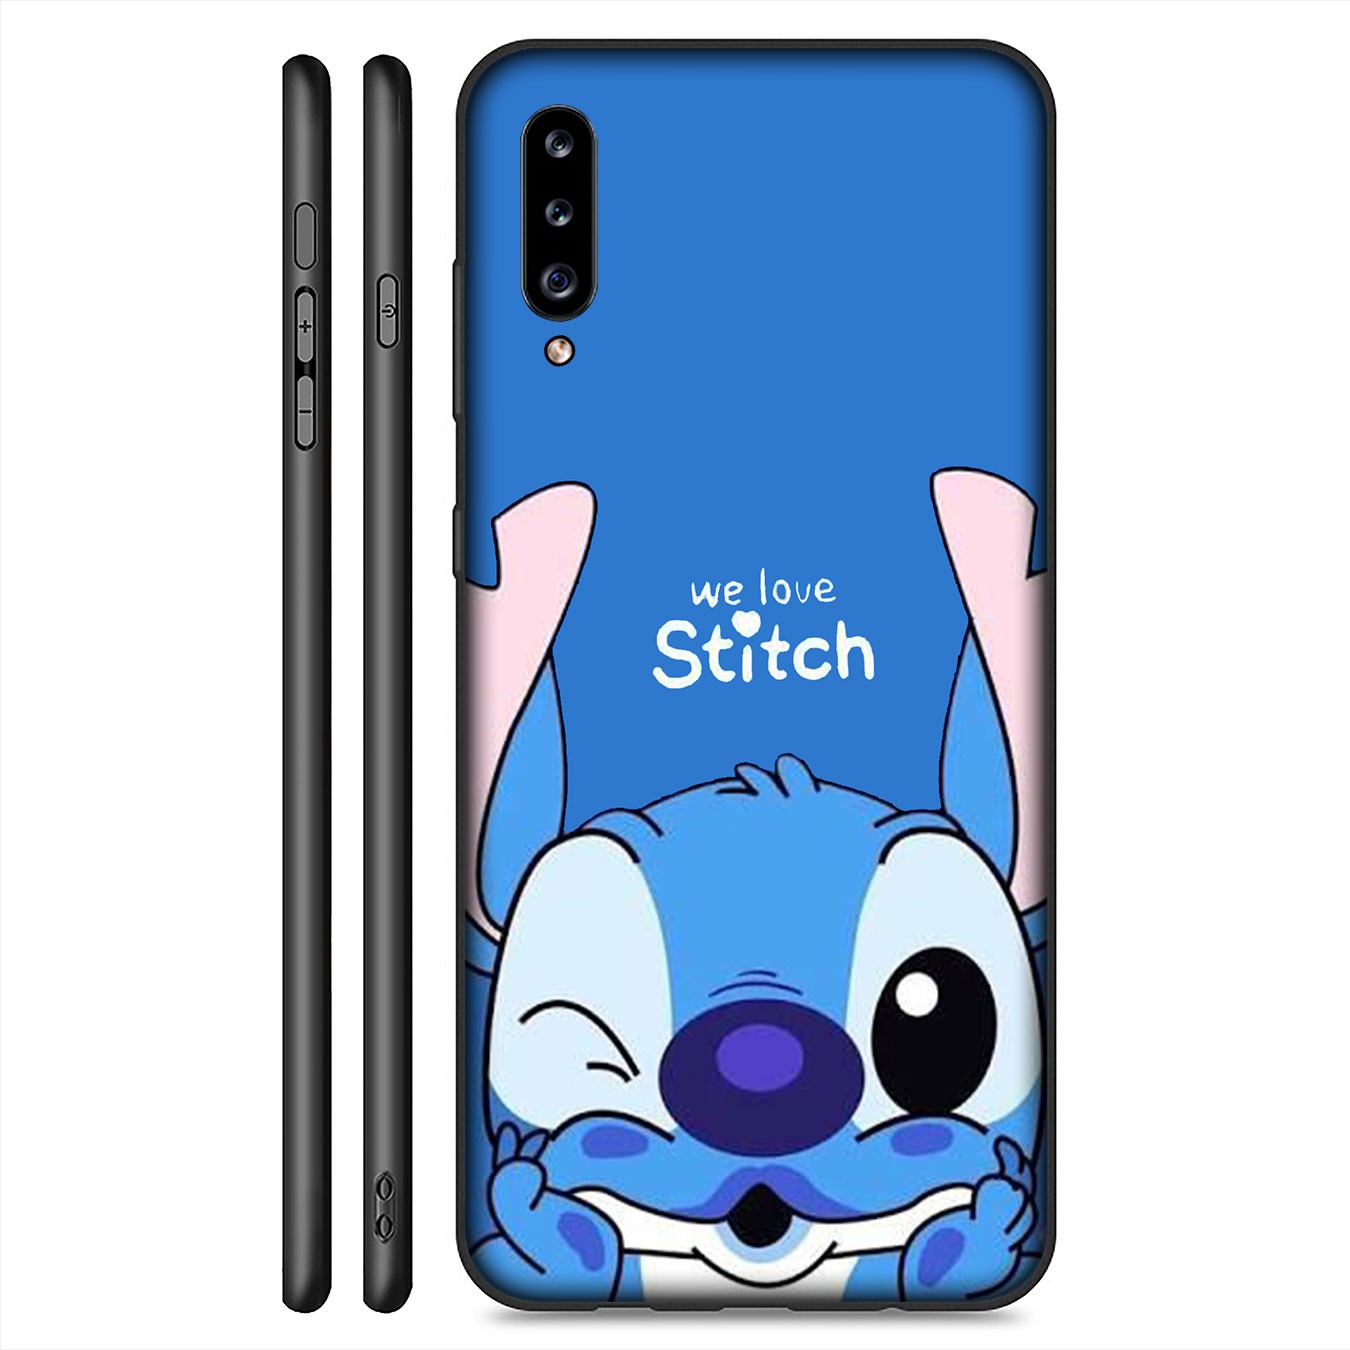 VIVO V20 SE Pro V19 V15 V11 Y55 Y81 Y70 2020 Y55s Y81s Y53 VIVOV20 Casing Soft Silicone H66 Lovely Stitch cute Phone Case